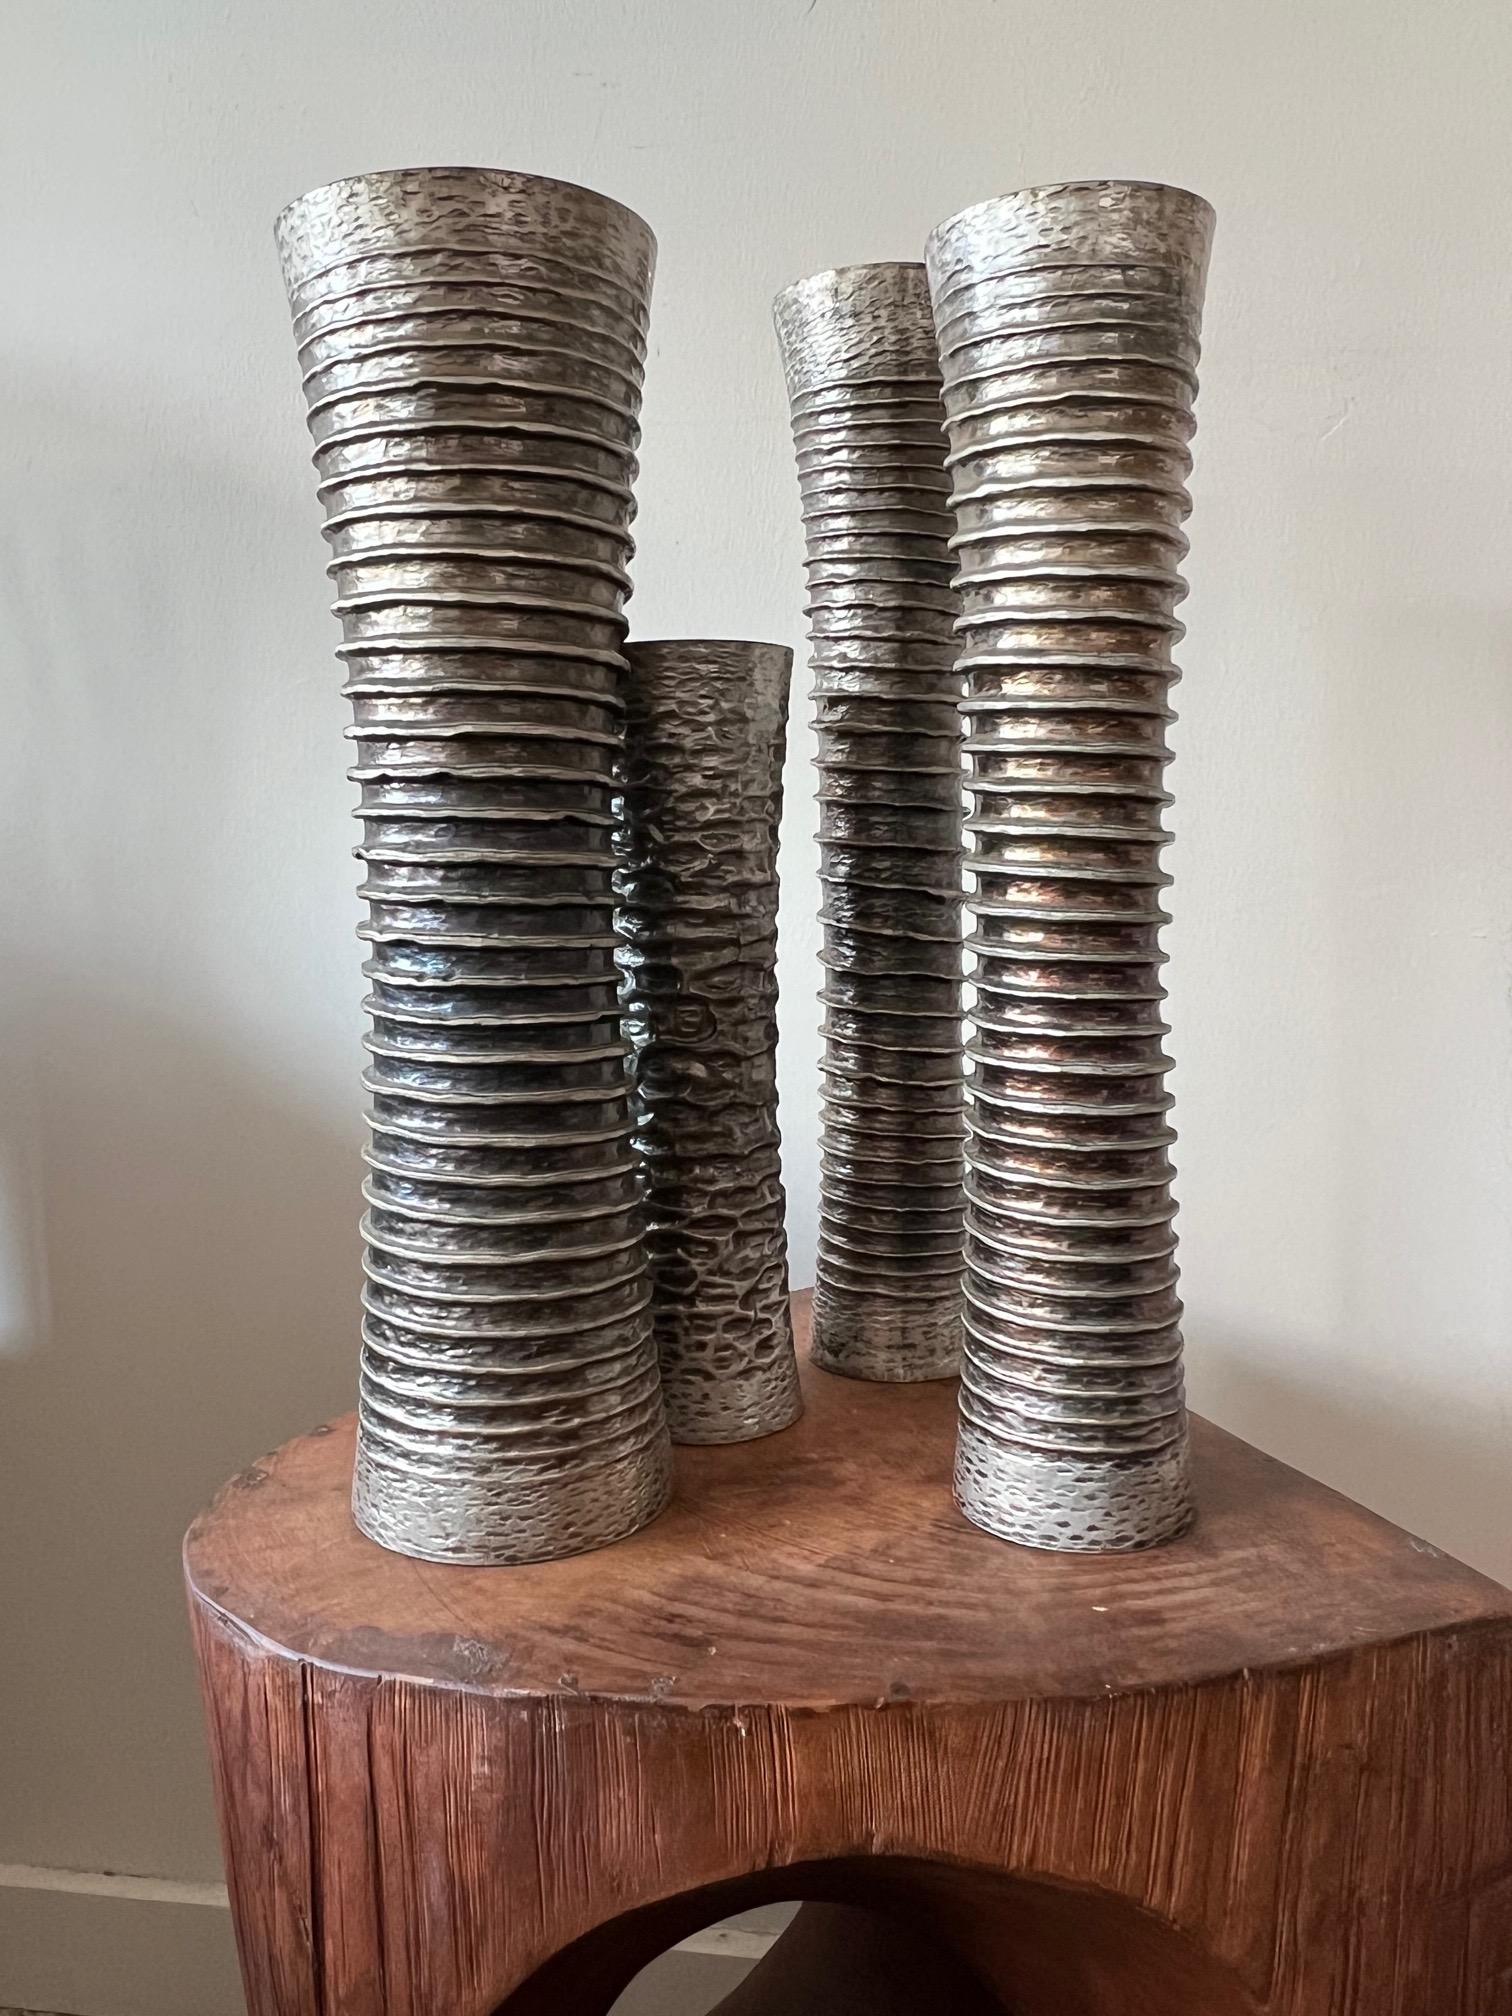 A group of four handmade vases in silvered metal by Atelier des Orfevres, Italy. A maker of jewelry and decorative objects, some pieces designed by Ken Scott.